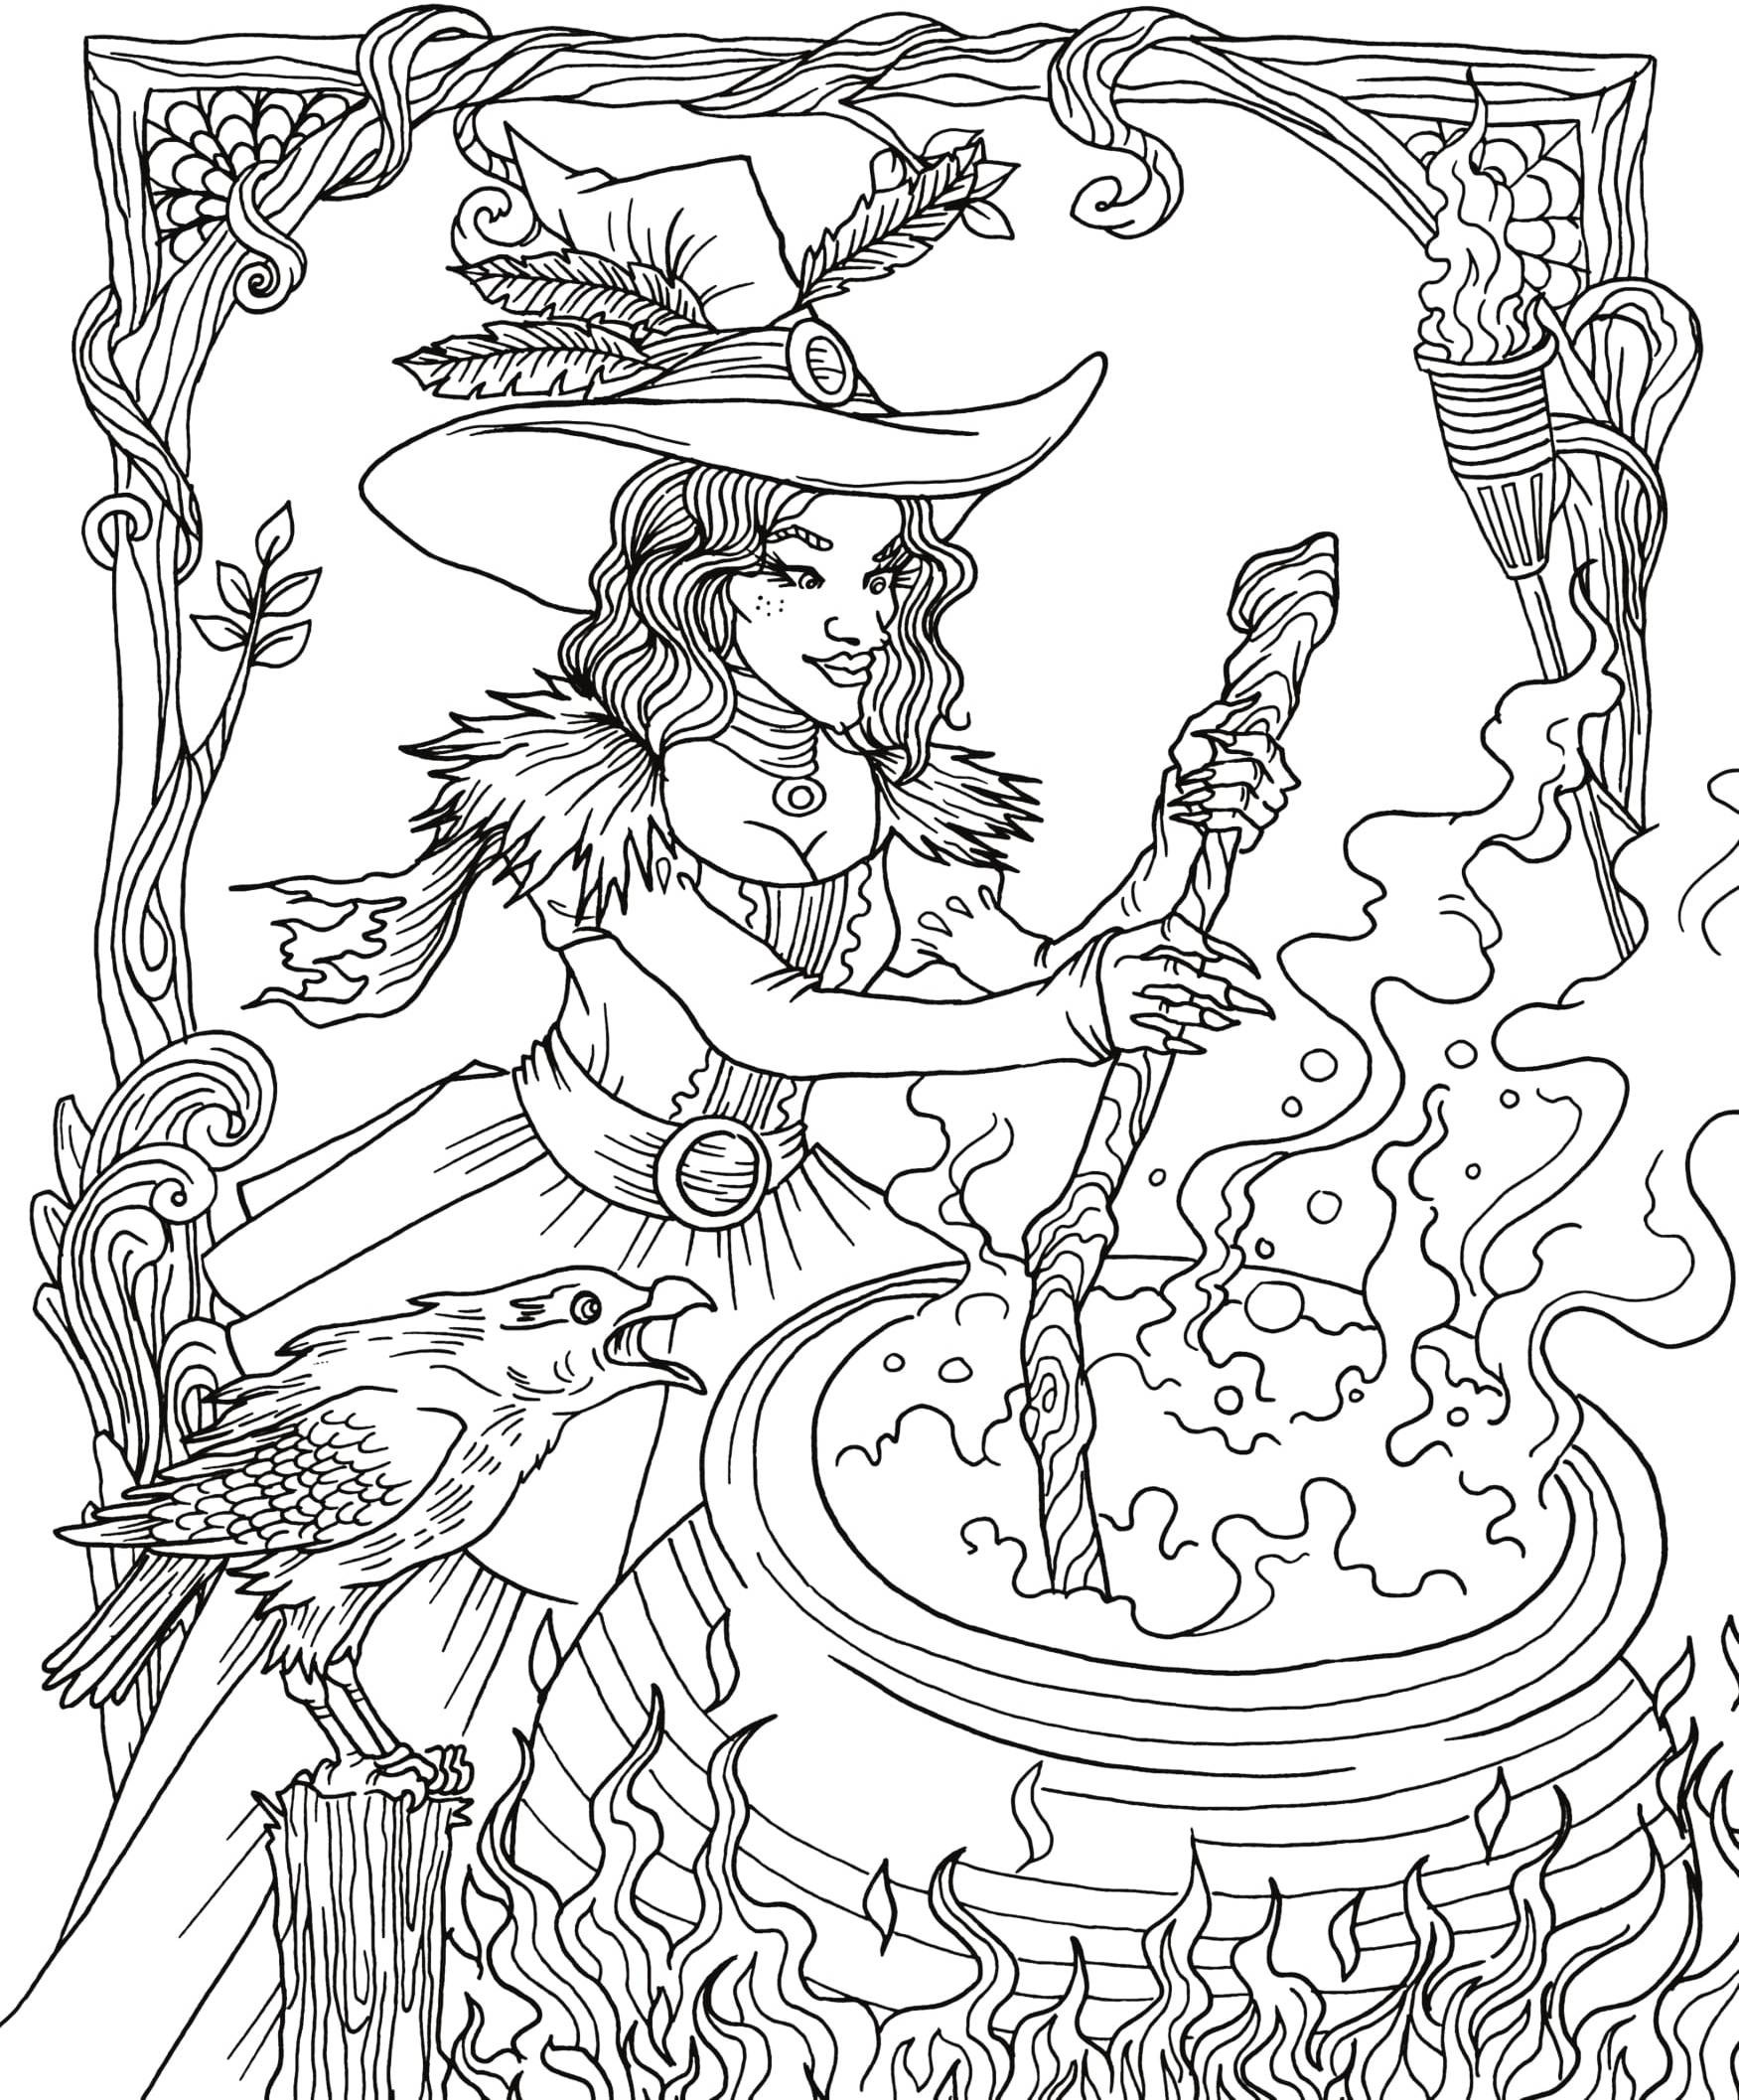 Freebie Friday 10-25-19 Mythical & Fanstasy Coloring Page